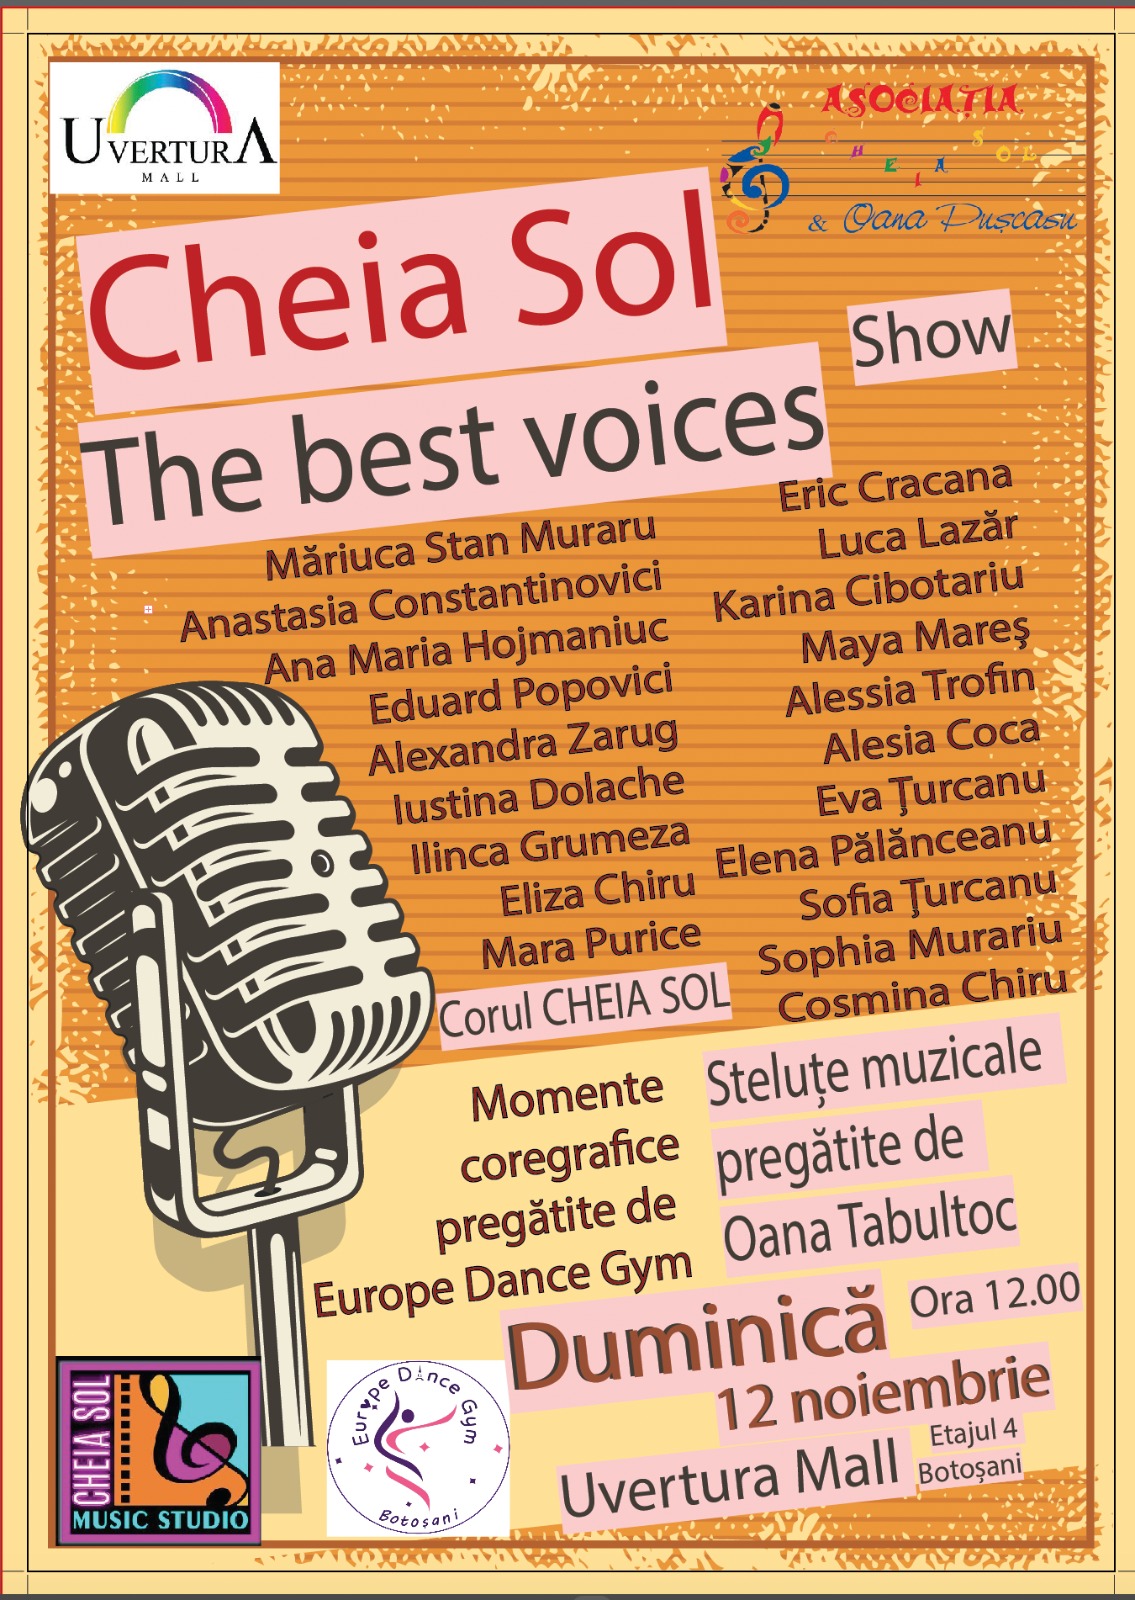 Cheia Sol – The best voices Show